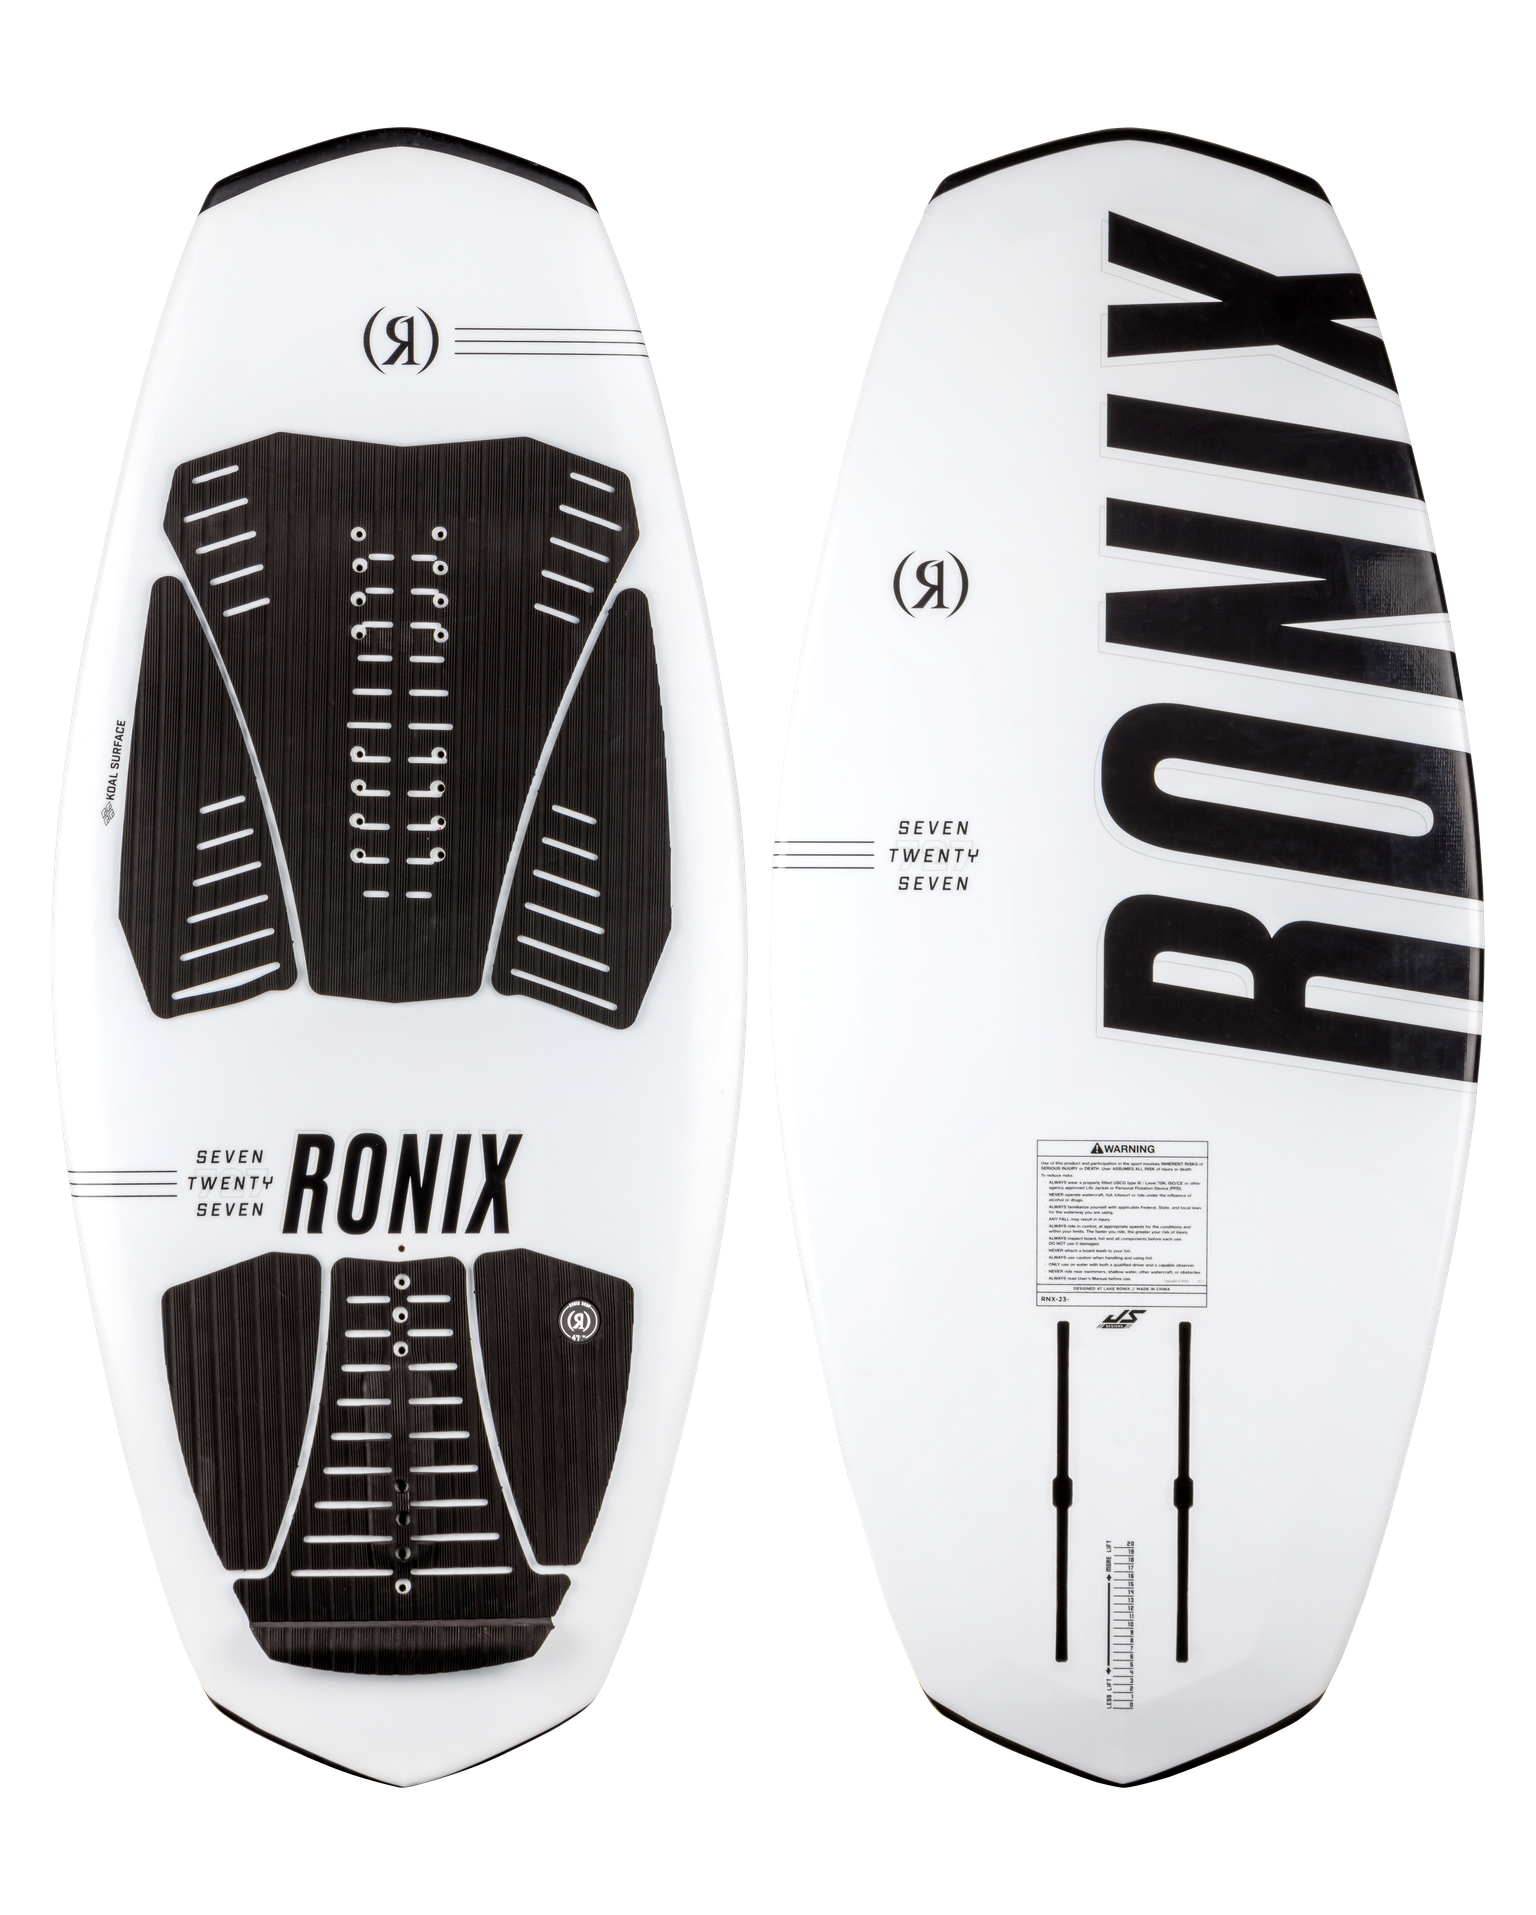 Ronix Koal Surface 727 Foil with a black and white design featuring foiling technology.